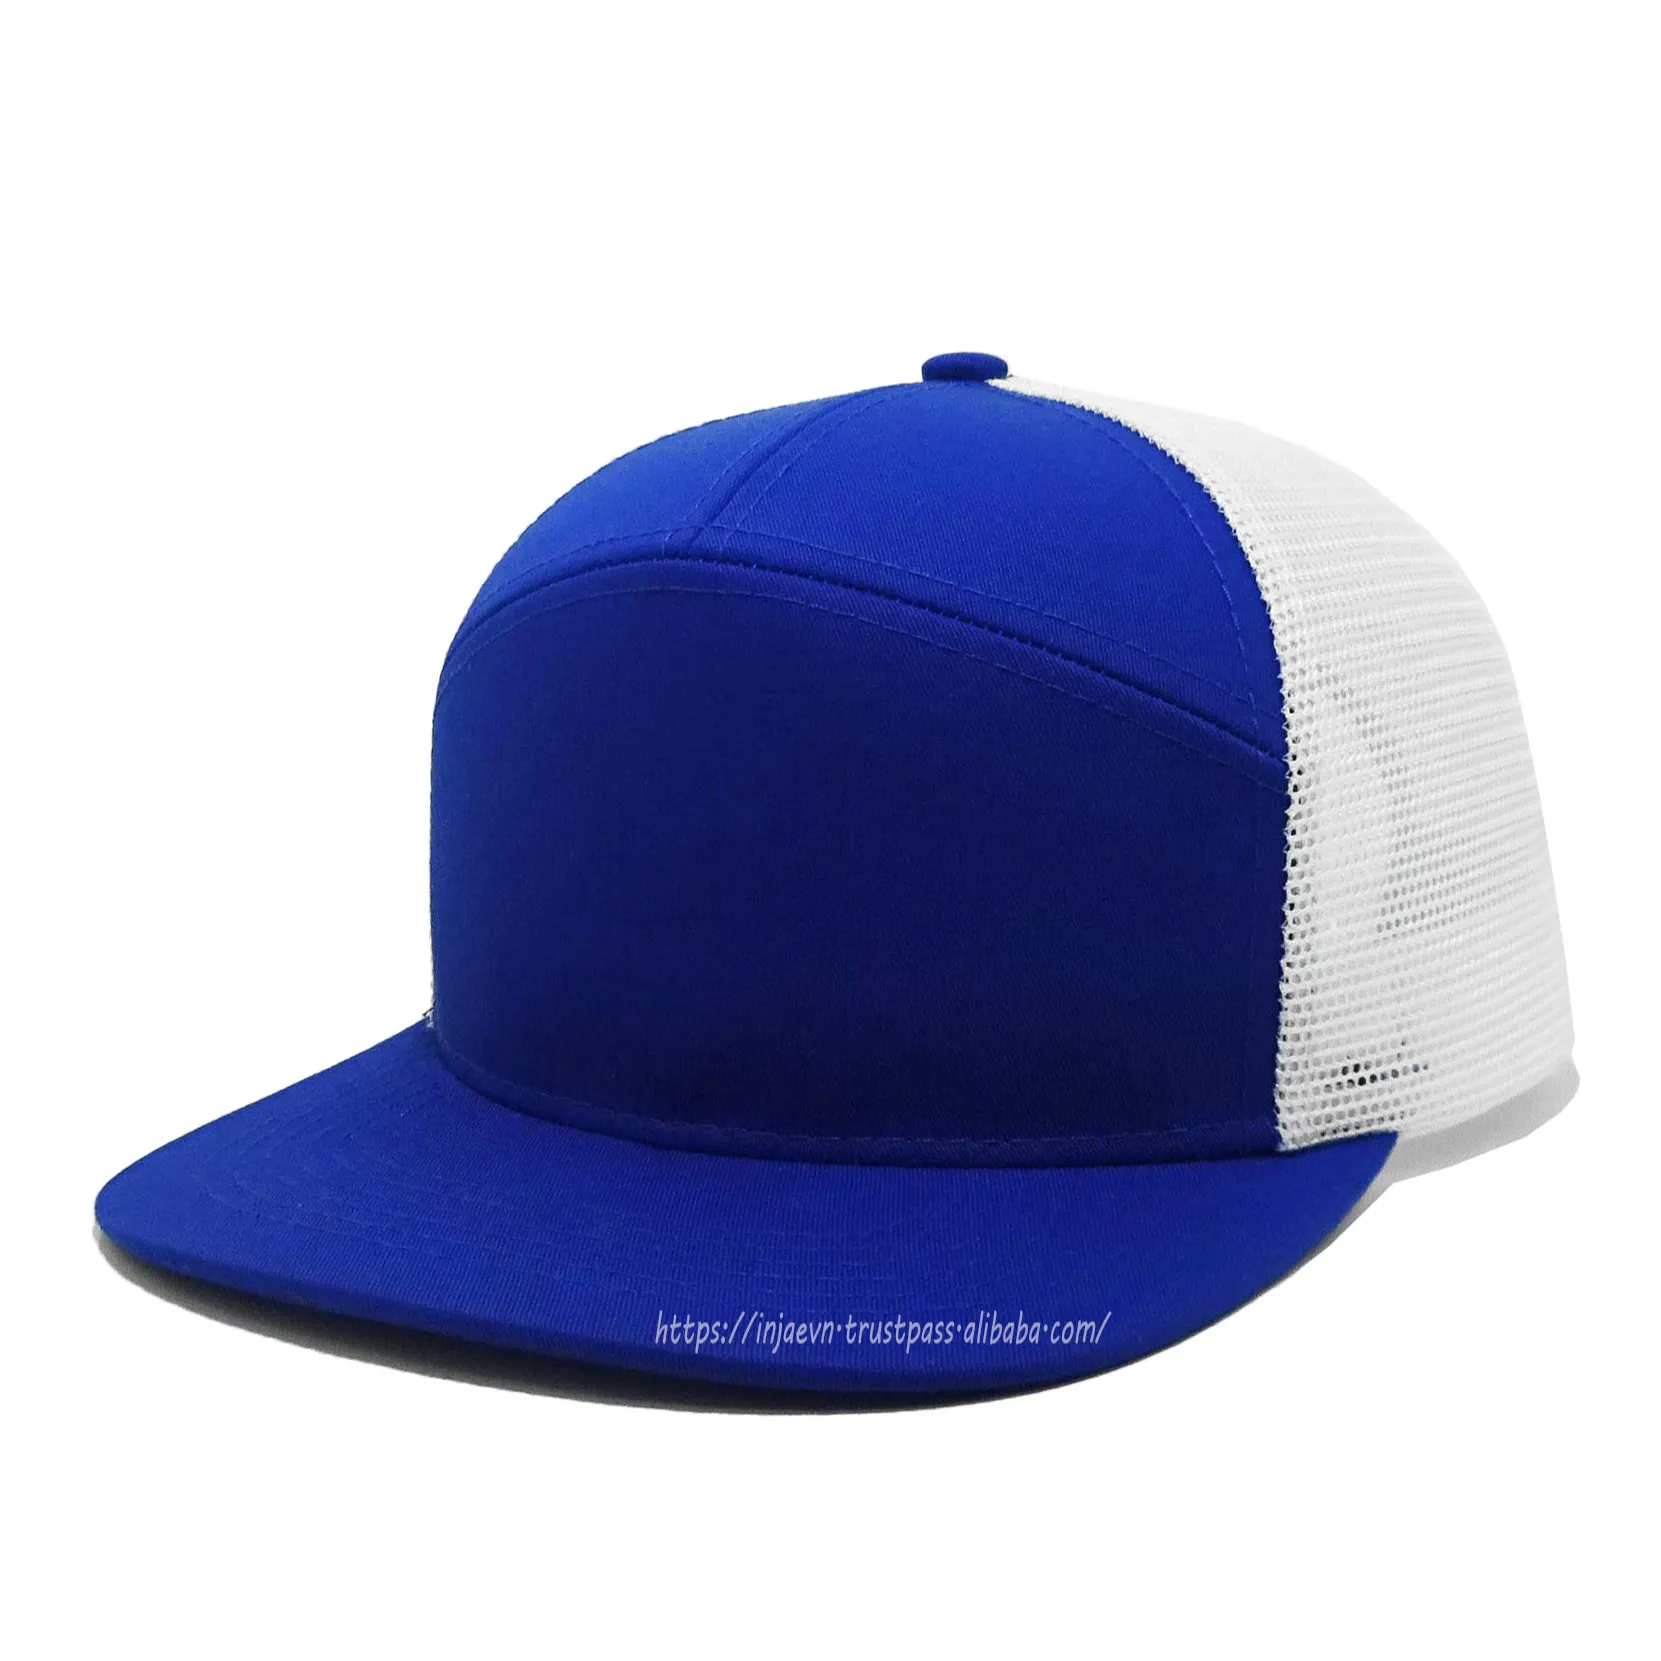 Manufacture High-Profile with 7 Panel Blue/White Mesh Snap Back Hat Sport Style Vietnam Headwear Adjustable Closures Promotional